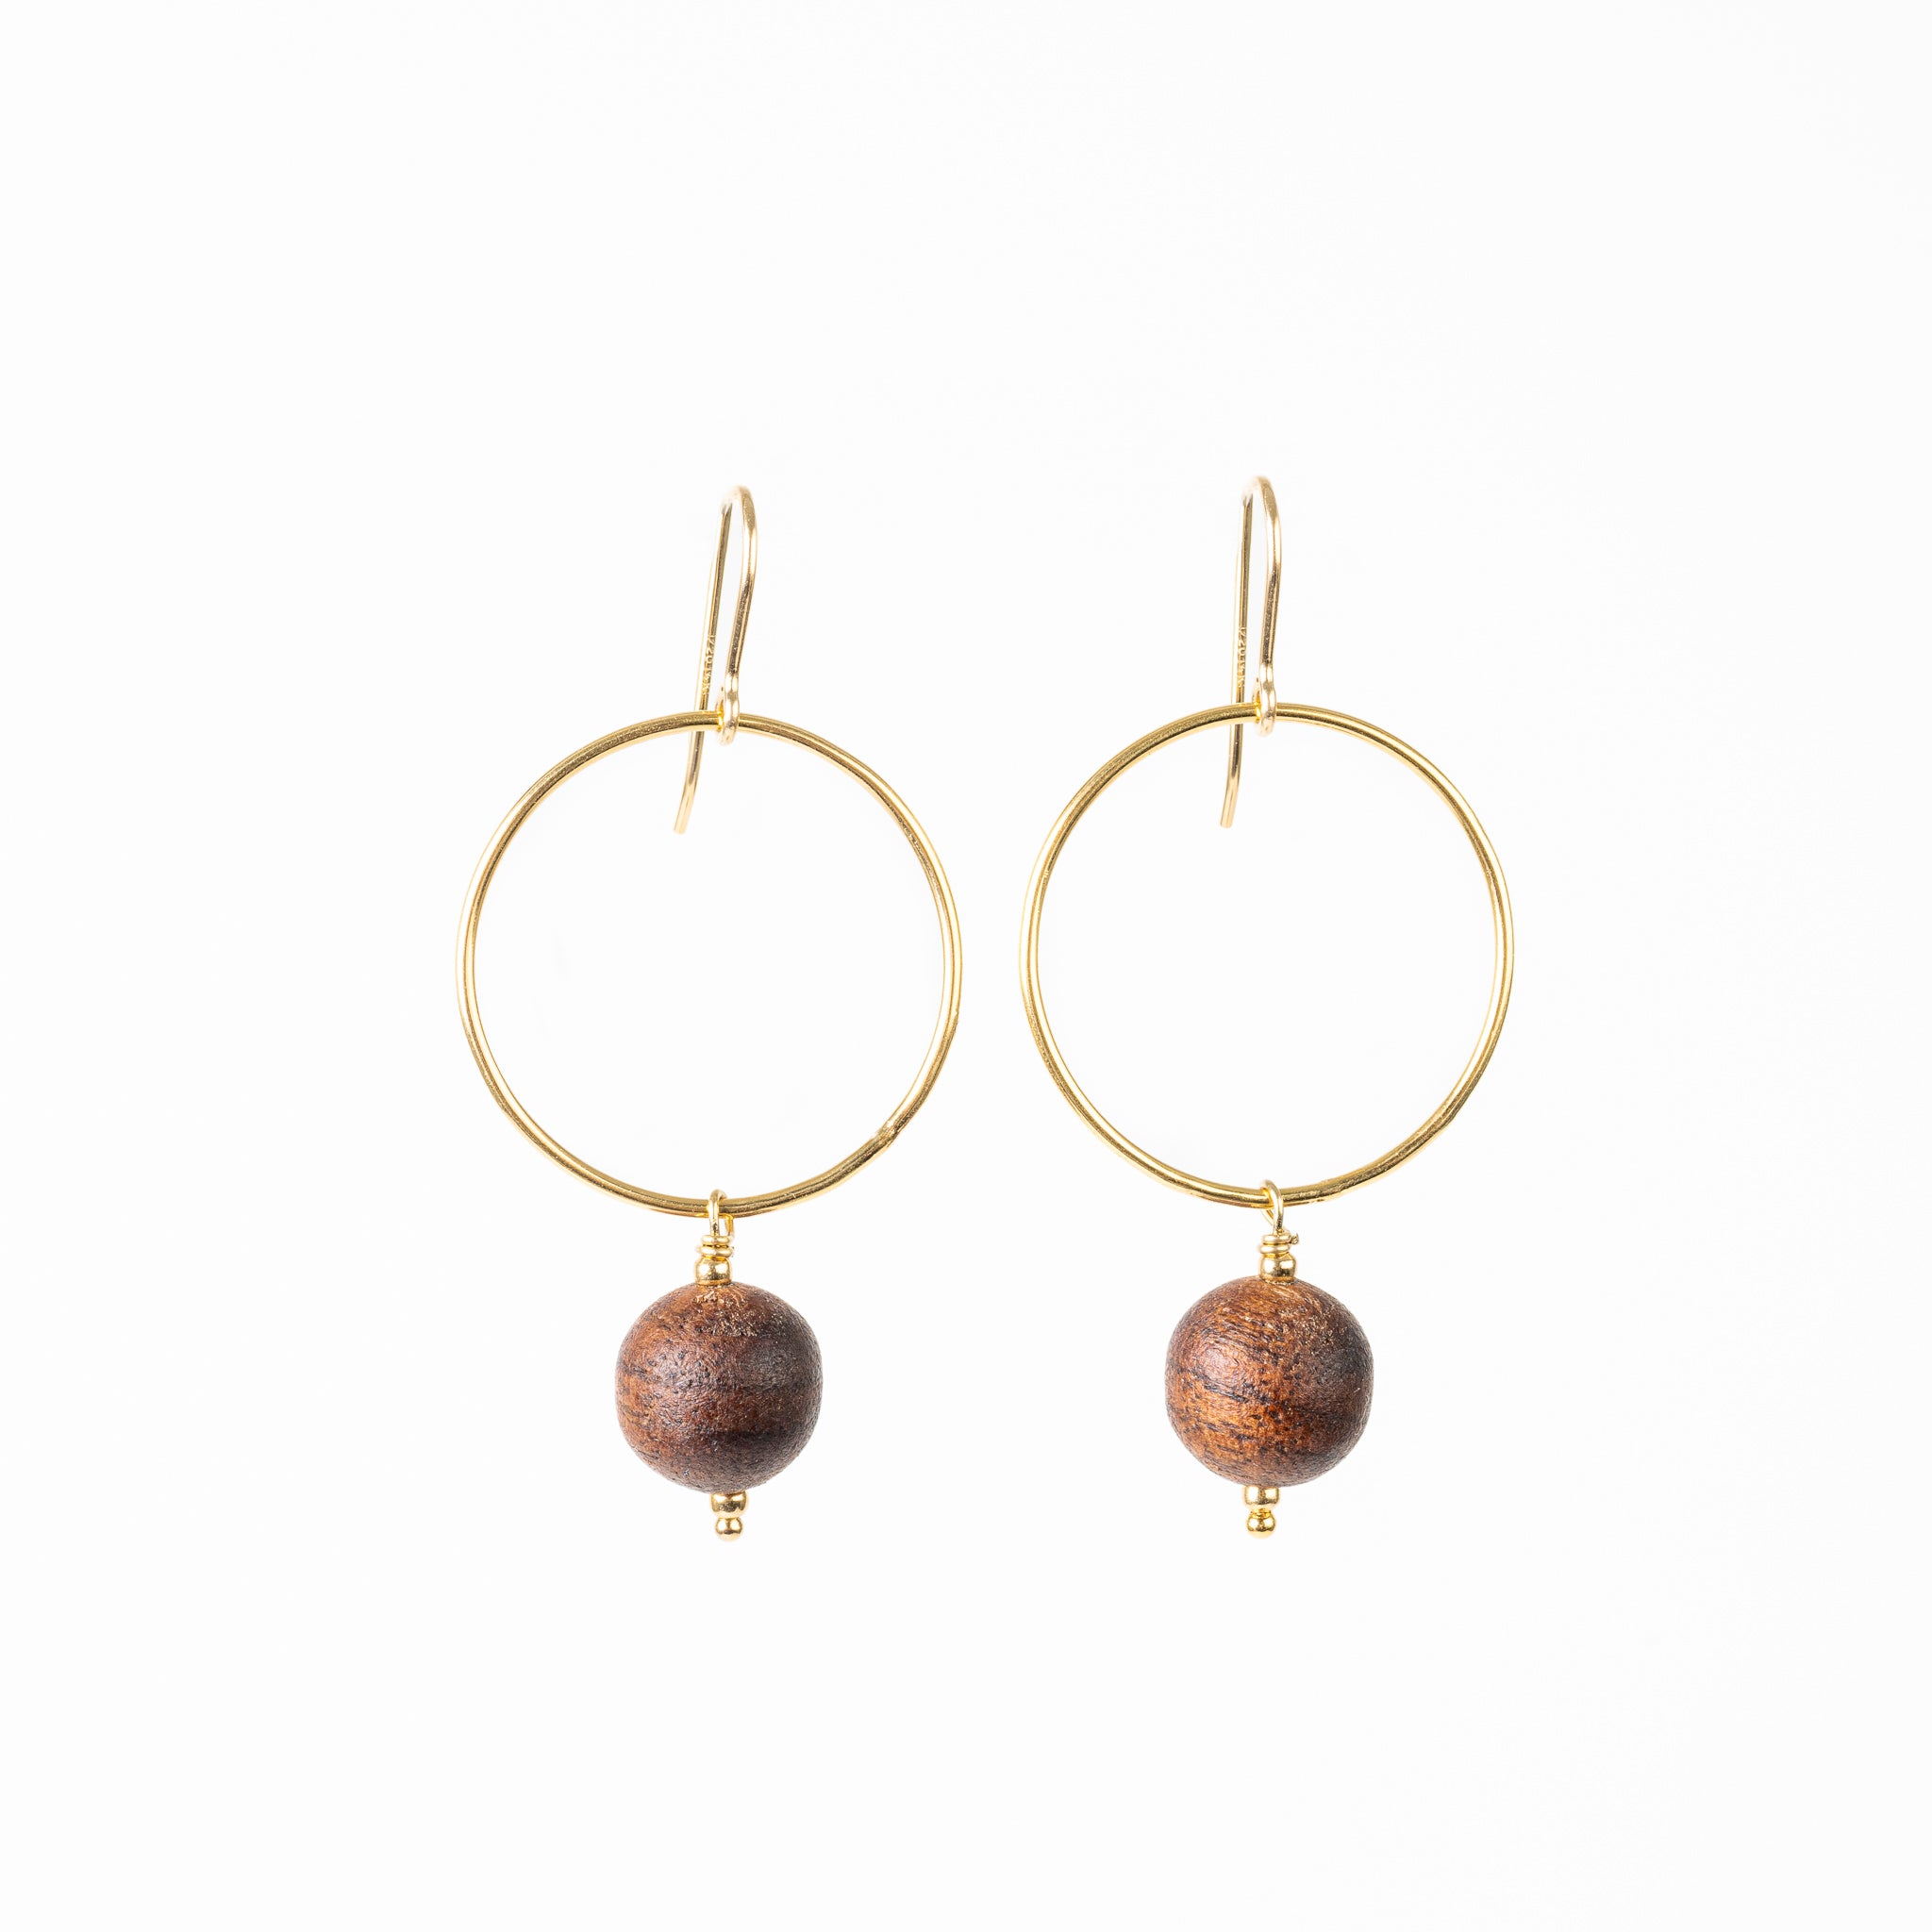 The Samantha - Walnut and Gold Earrings